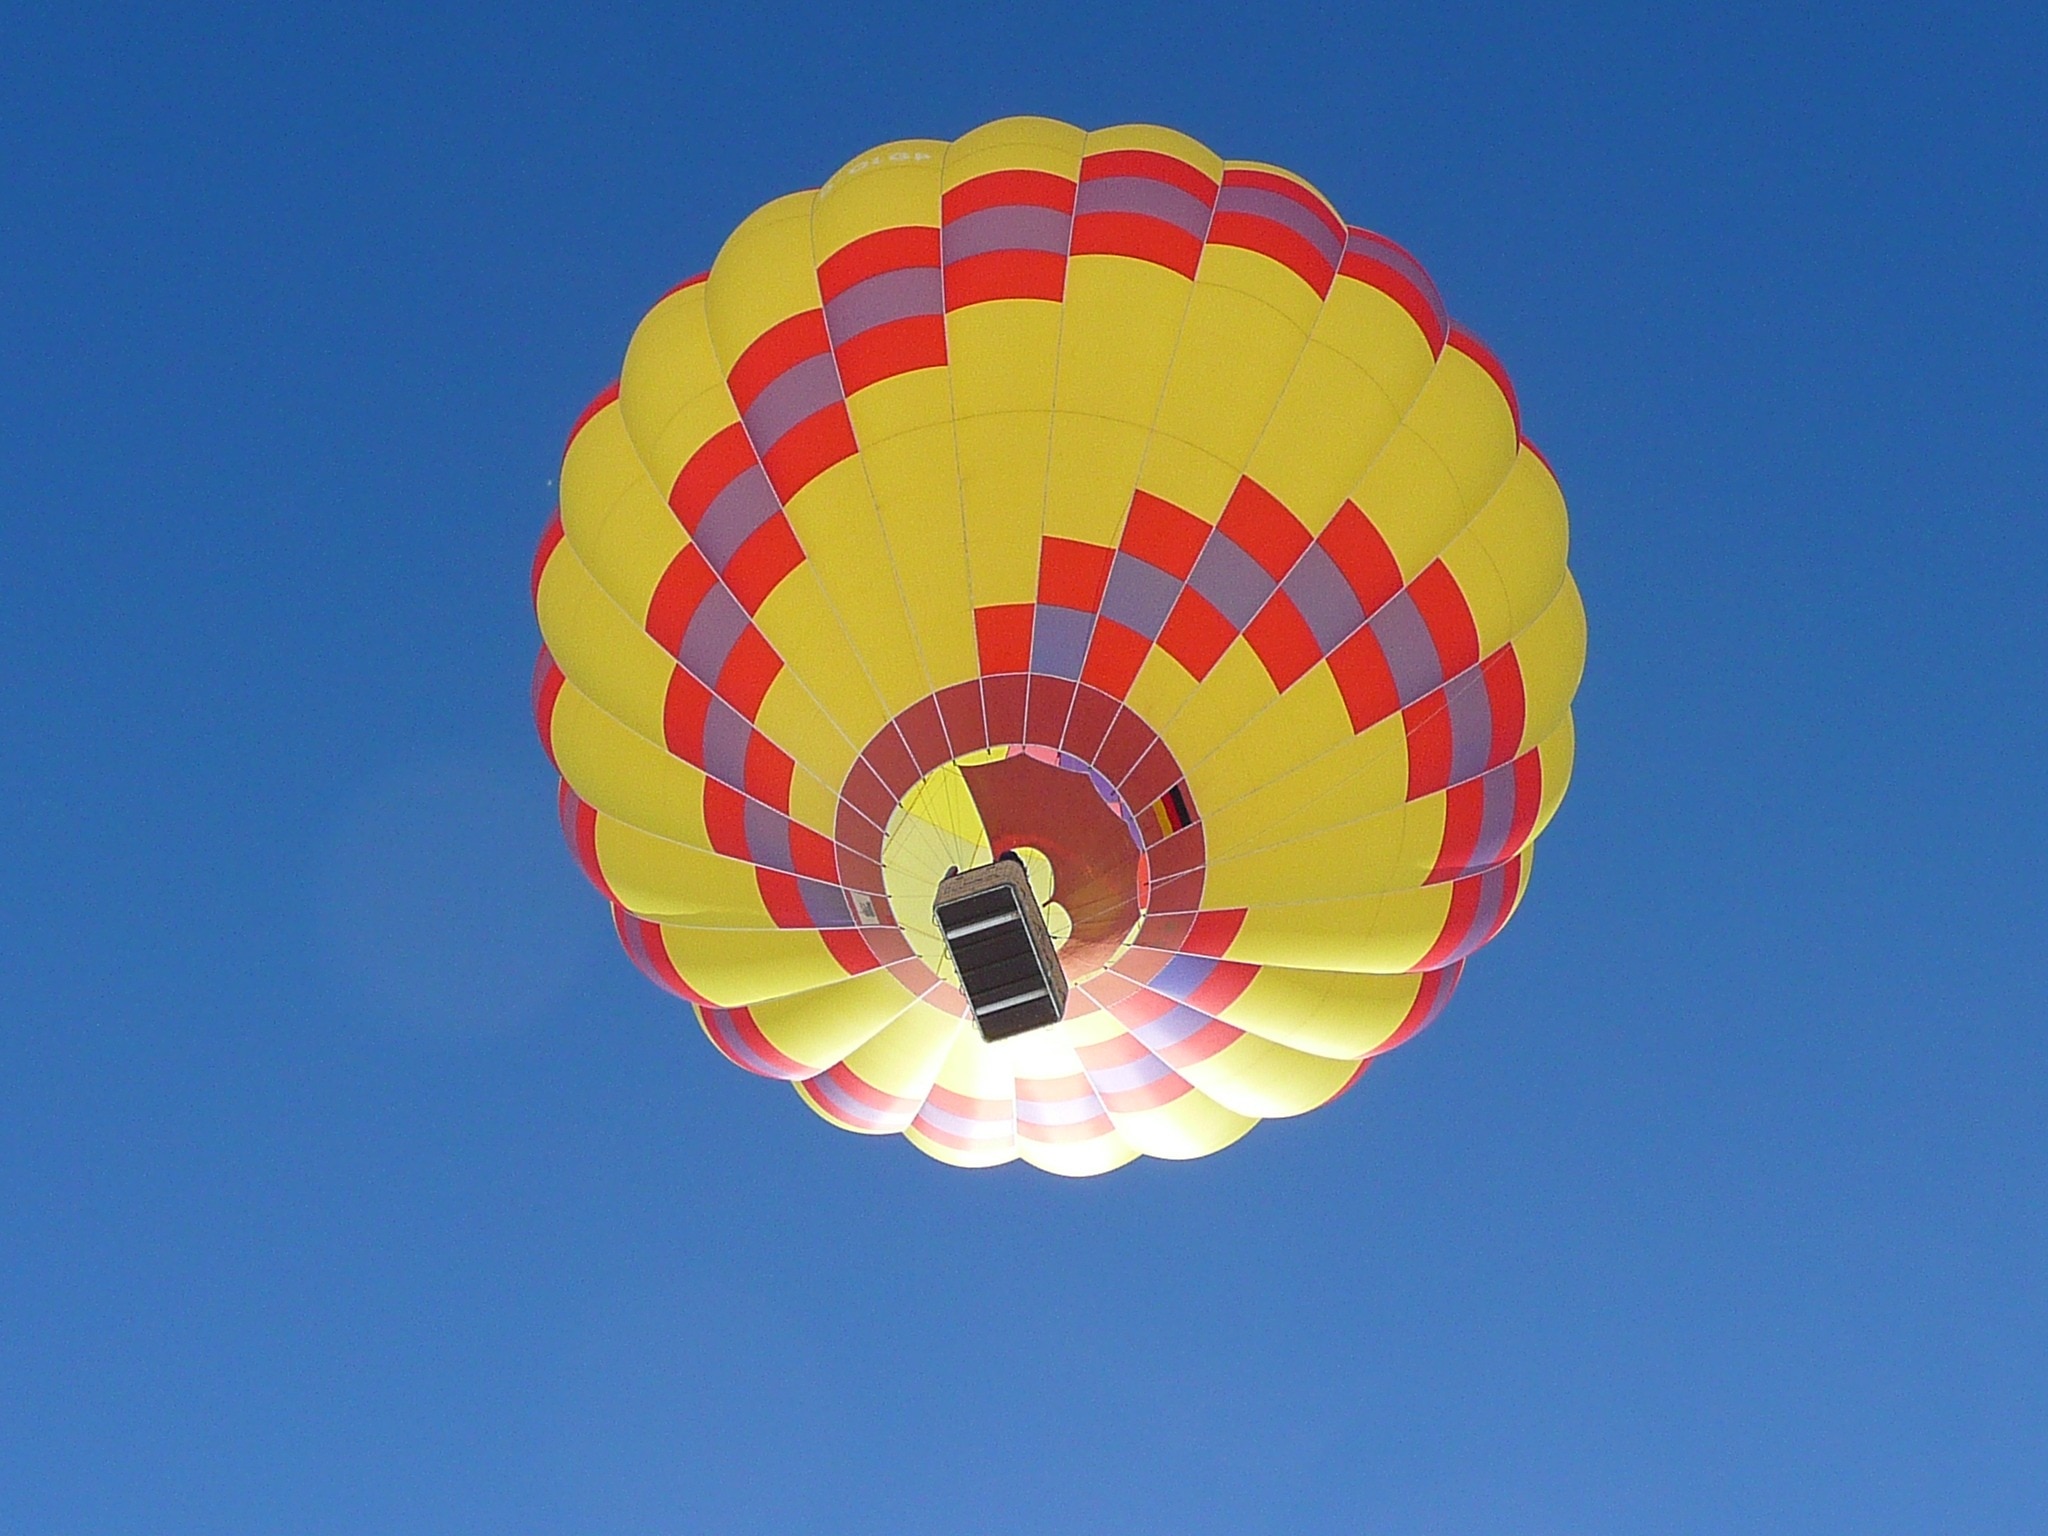 yellow, red and gray hot air balloon